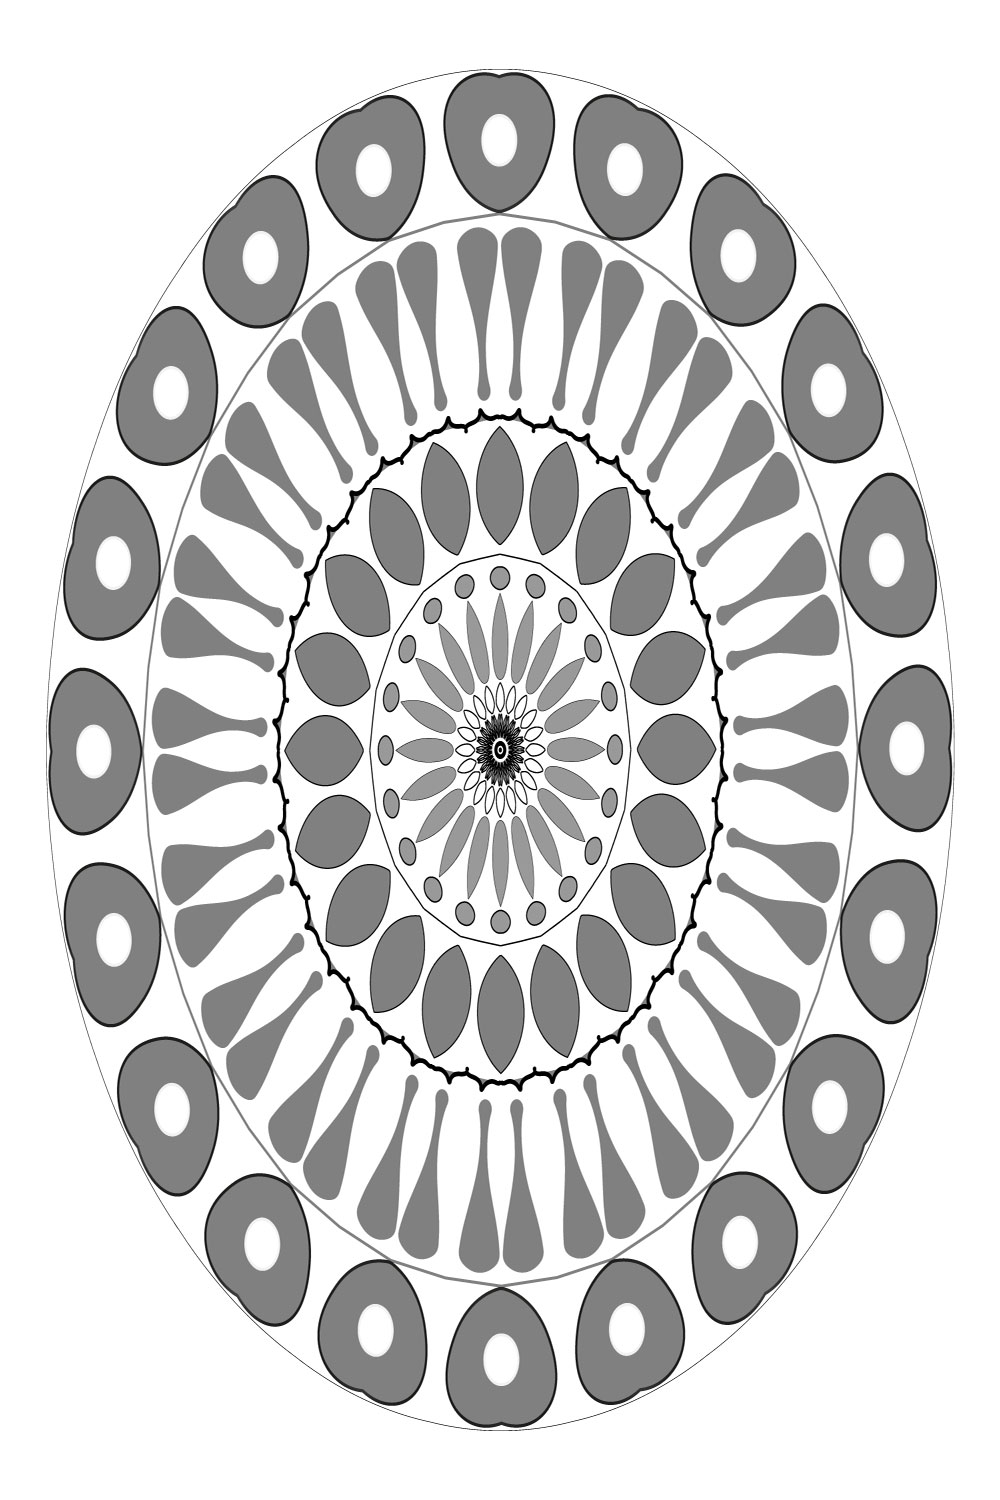 Mandala-art-with-rounded-shados-and-gray-pilers pinterest preview image.